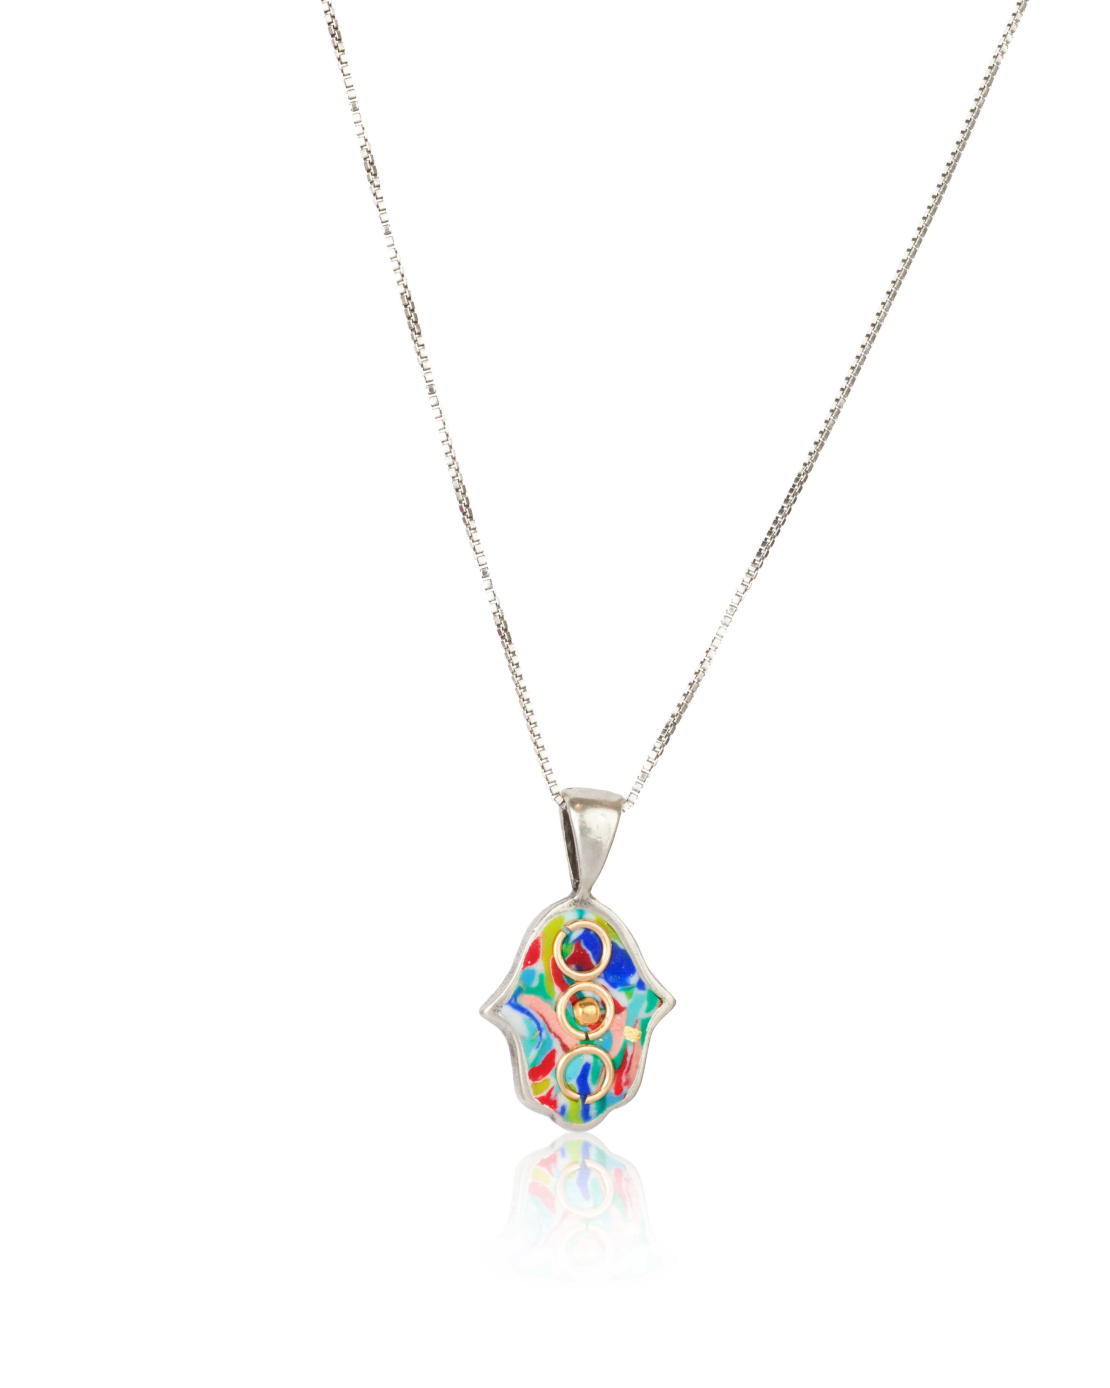 Colorful Sterling Hamsa Necklace